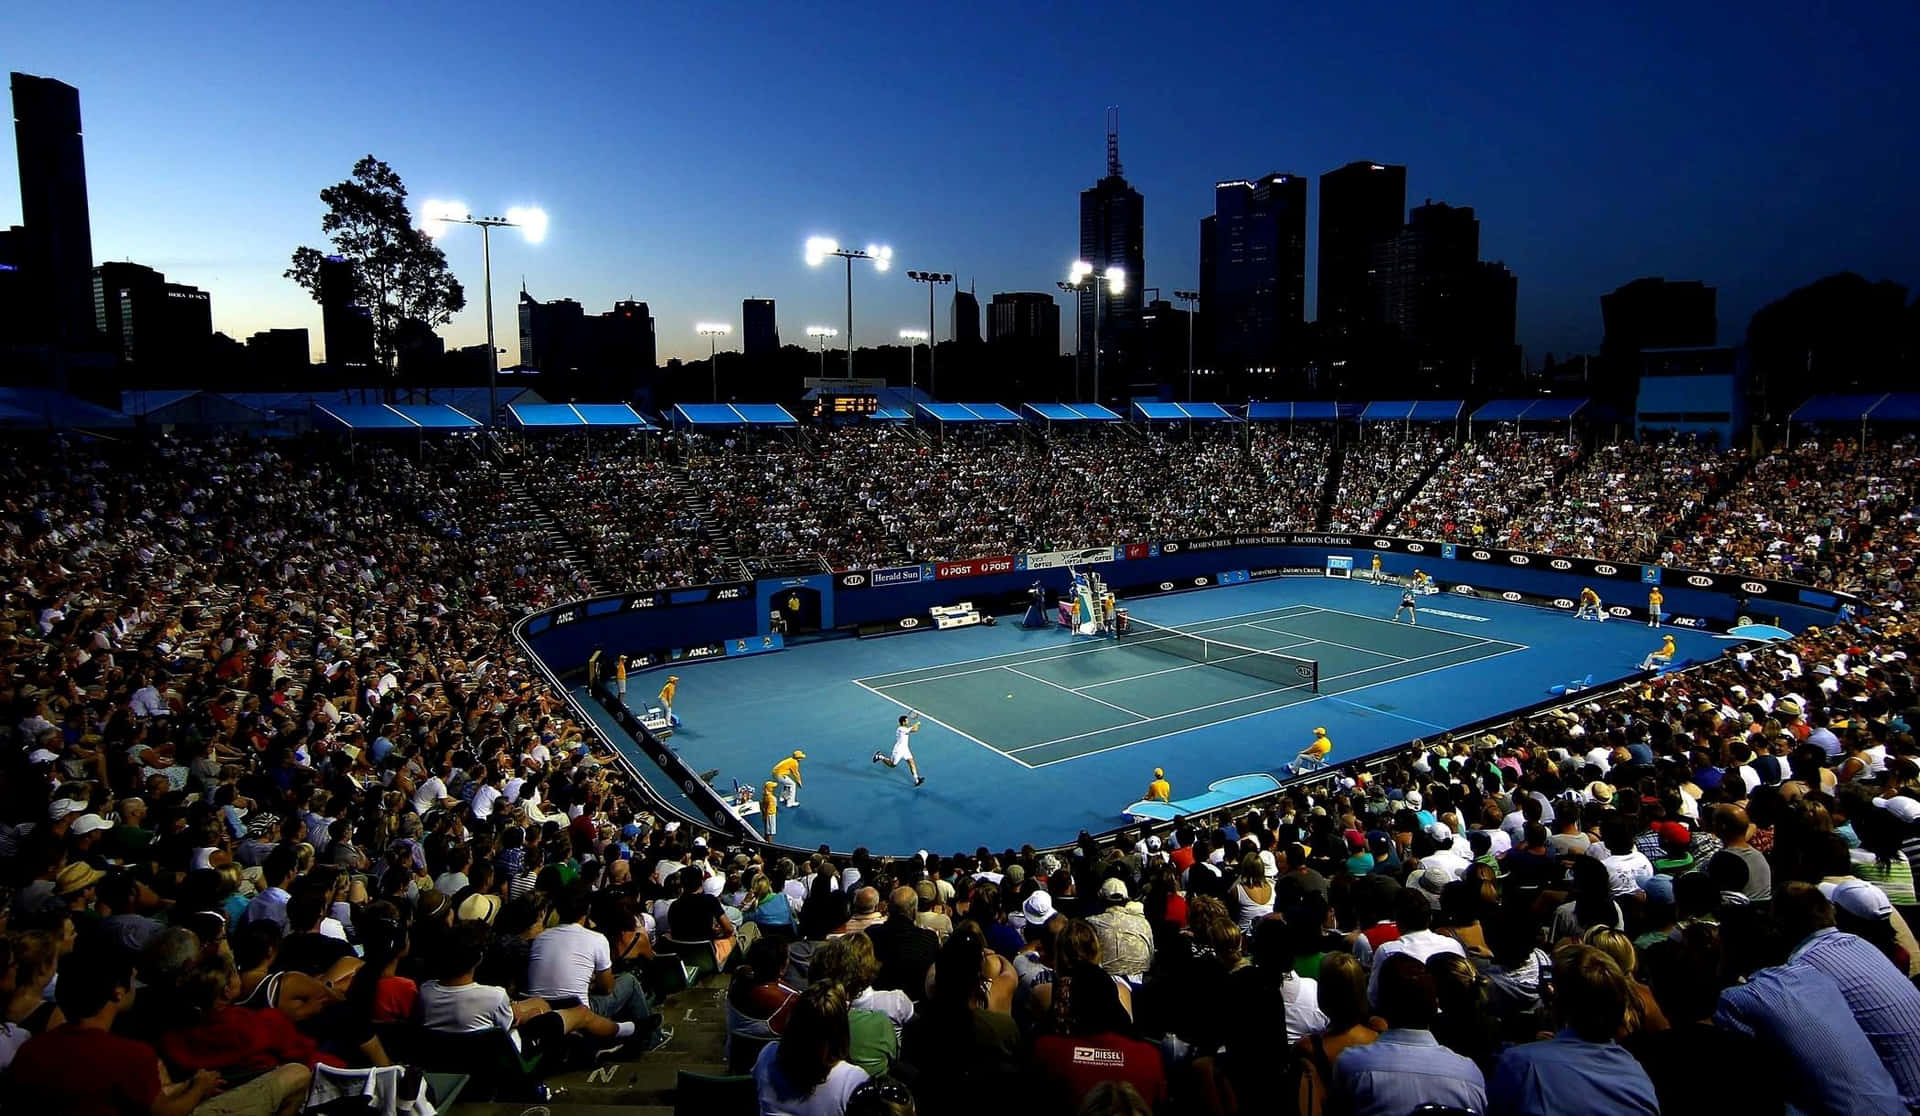 A Large Crowd Of People Watching A Tennis Match